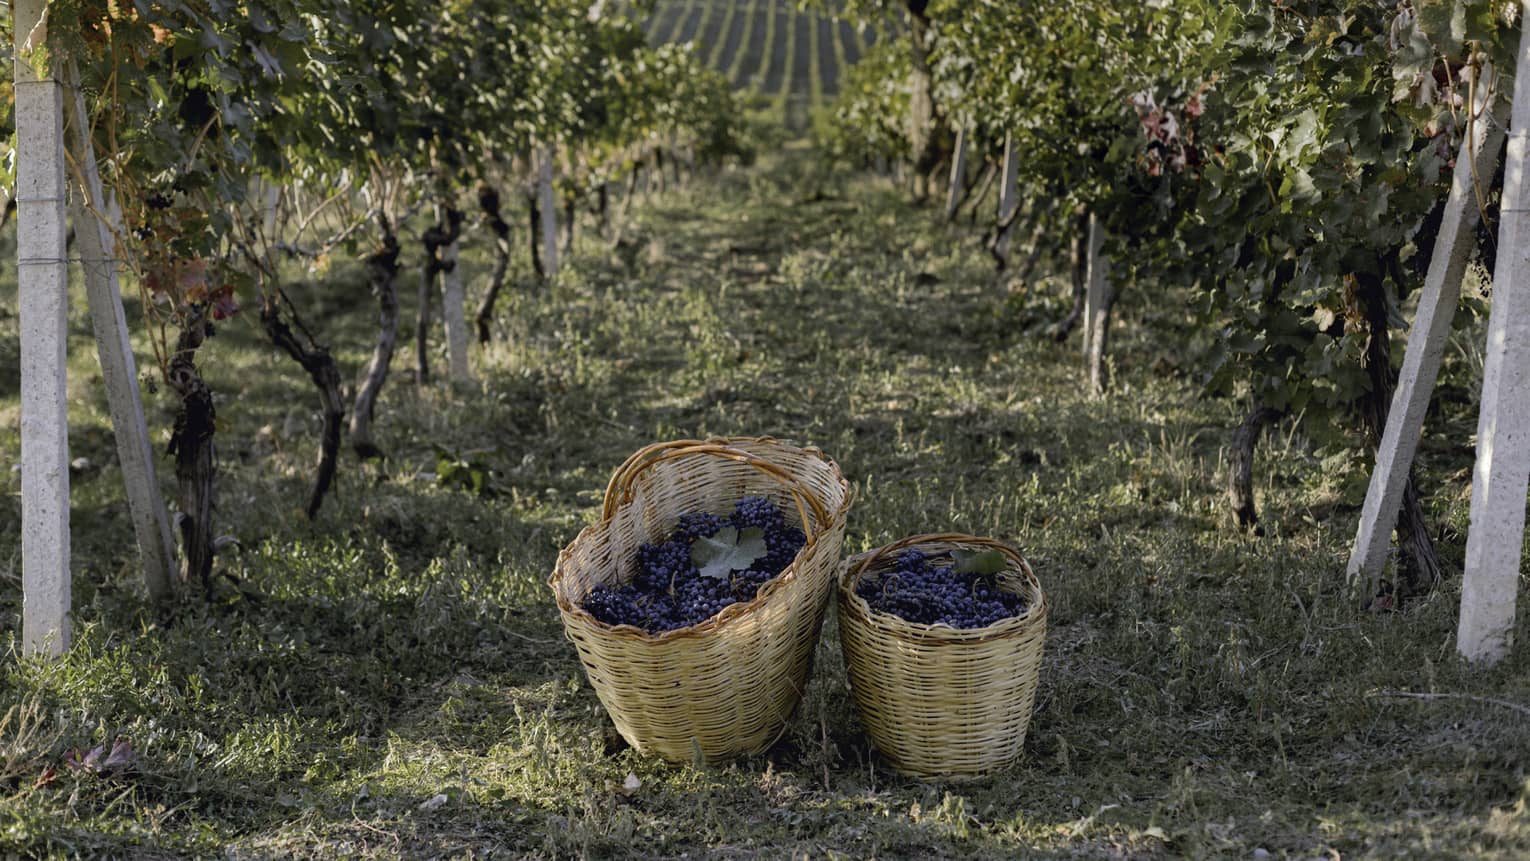 Two baskets of grapes on winery pathway